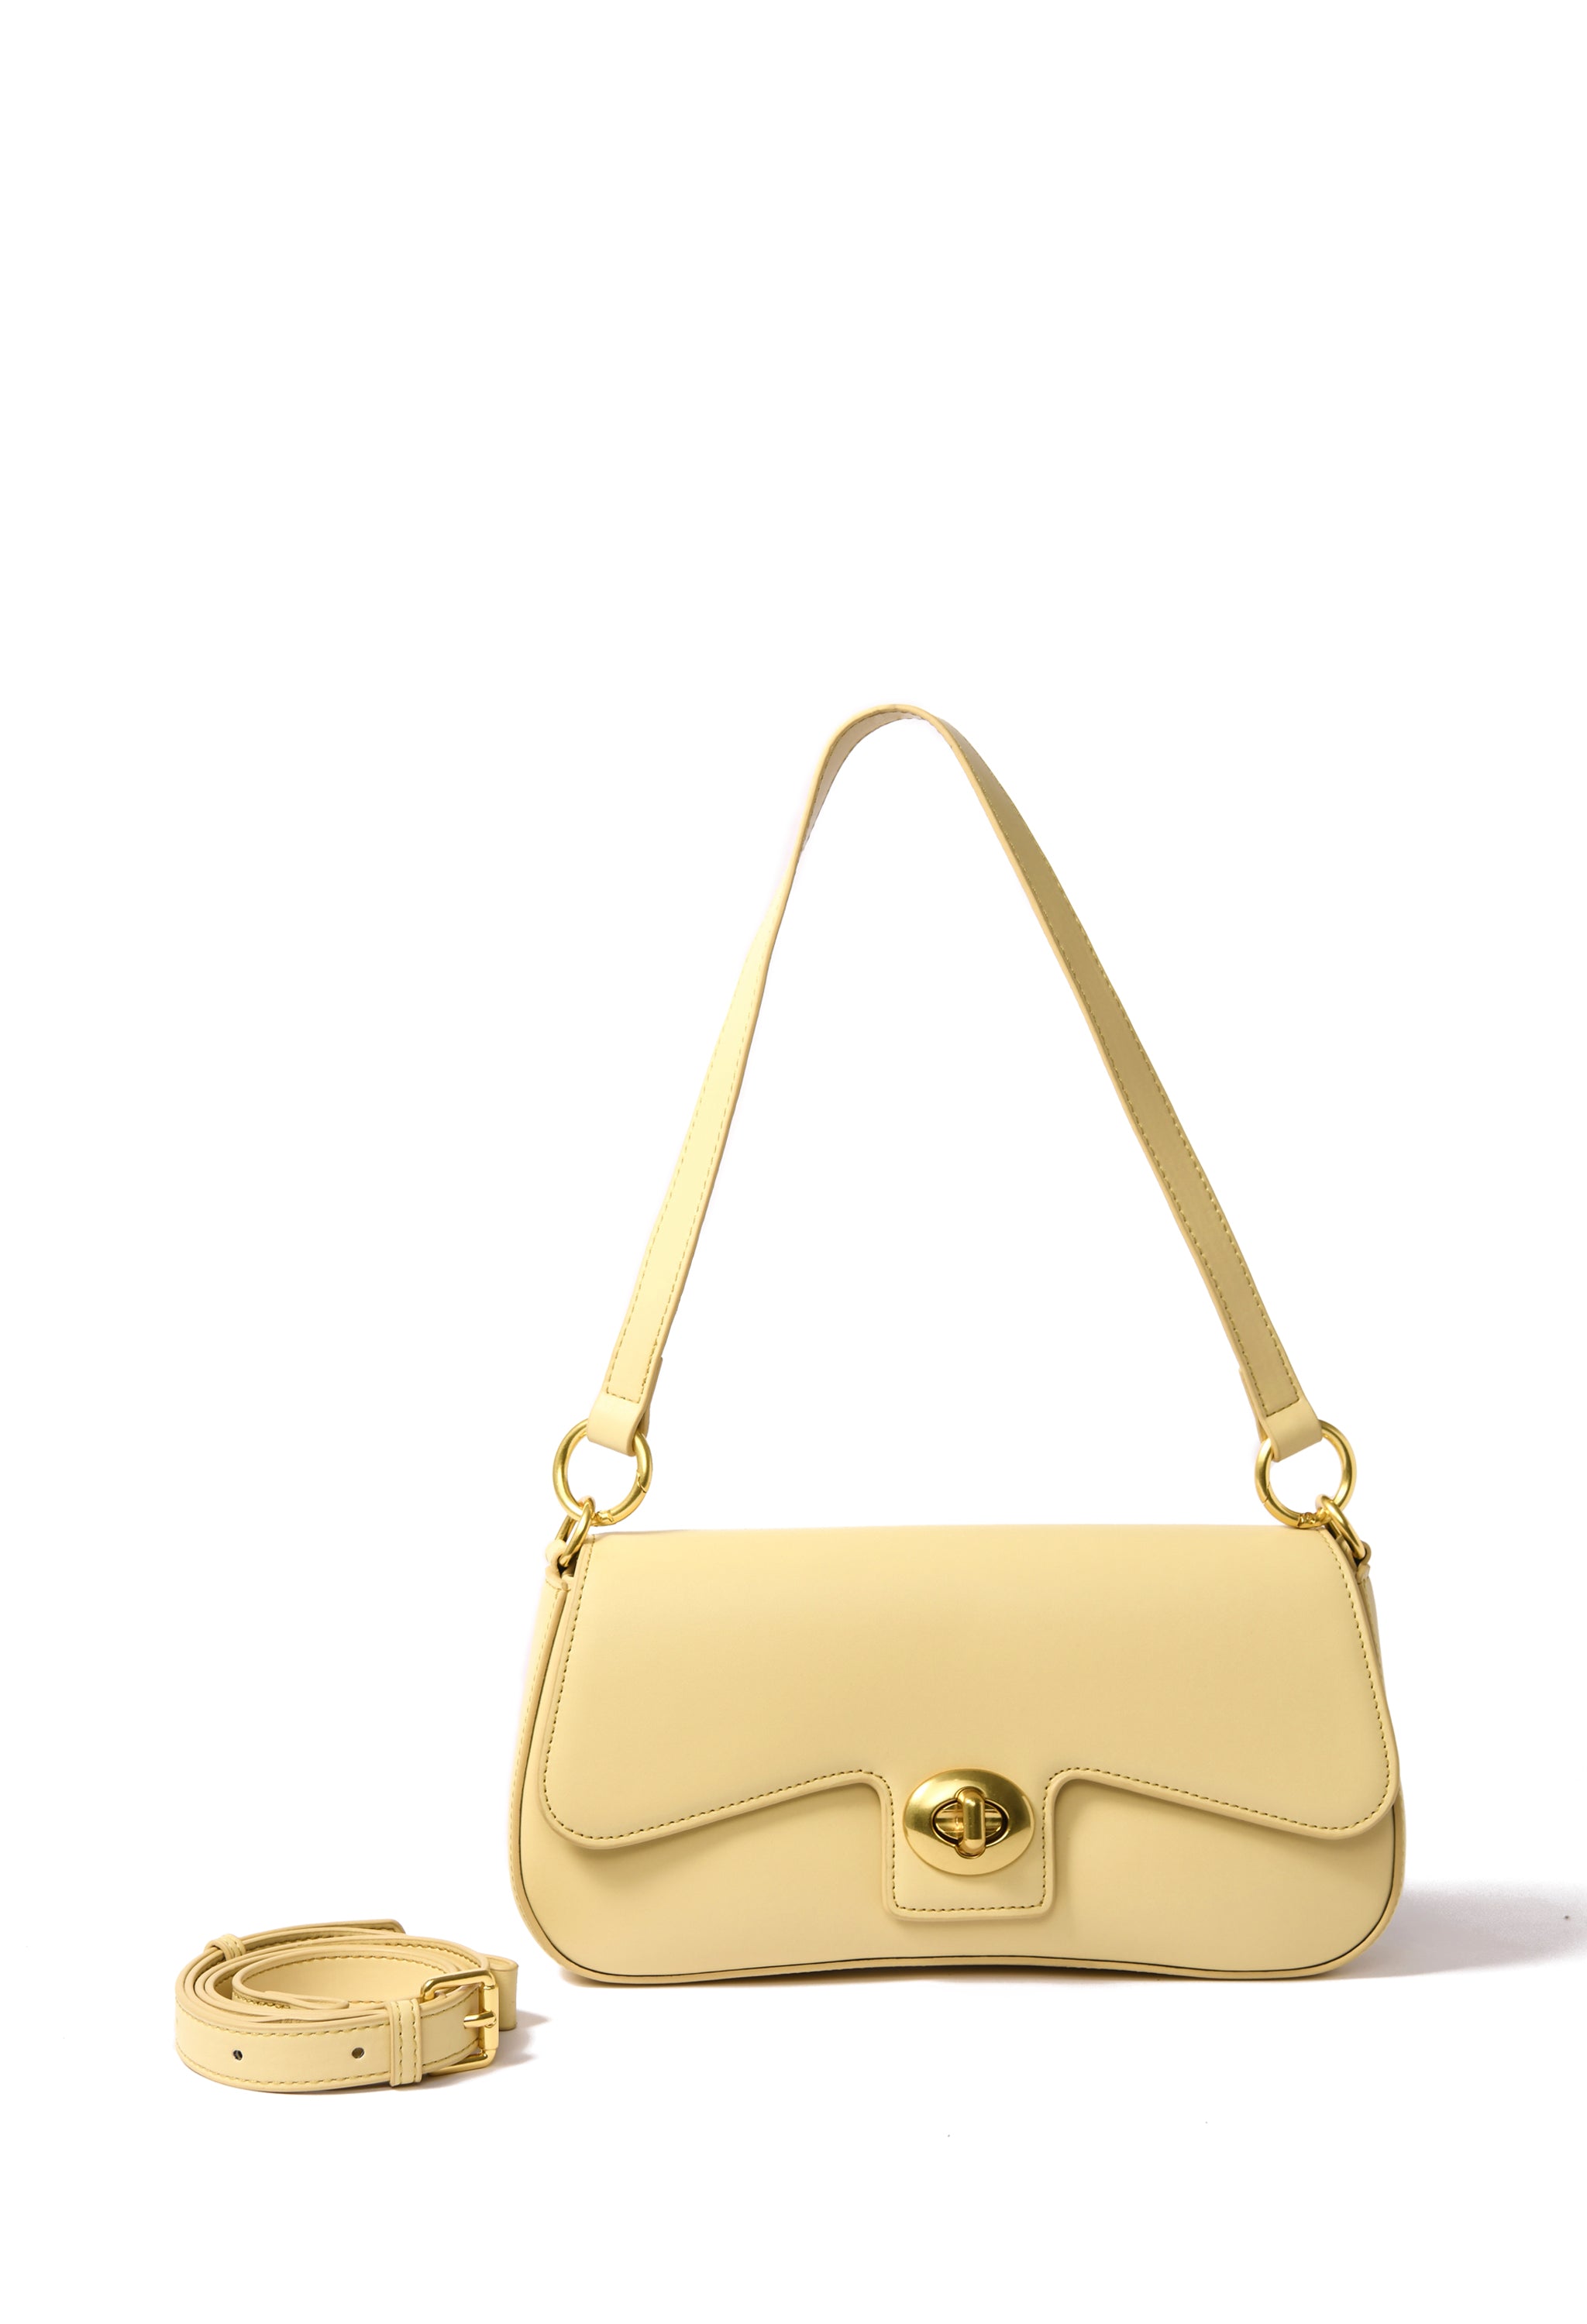 Jacqueline Bag in smooth leather, Yellow BOB ORE blue collection on sale 2022